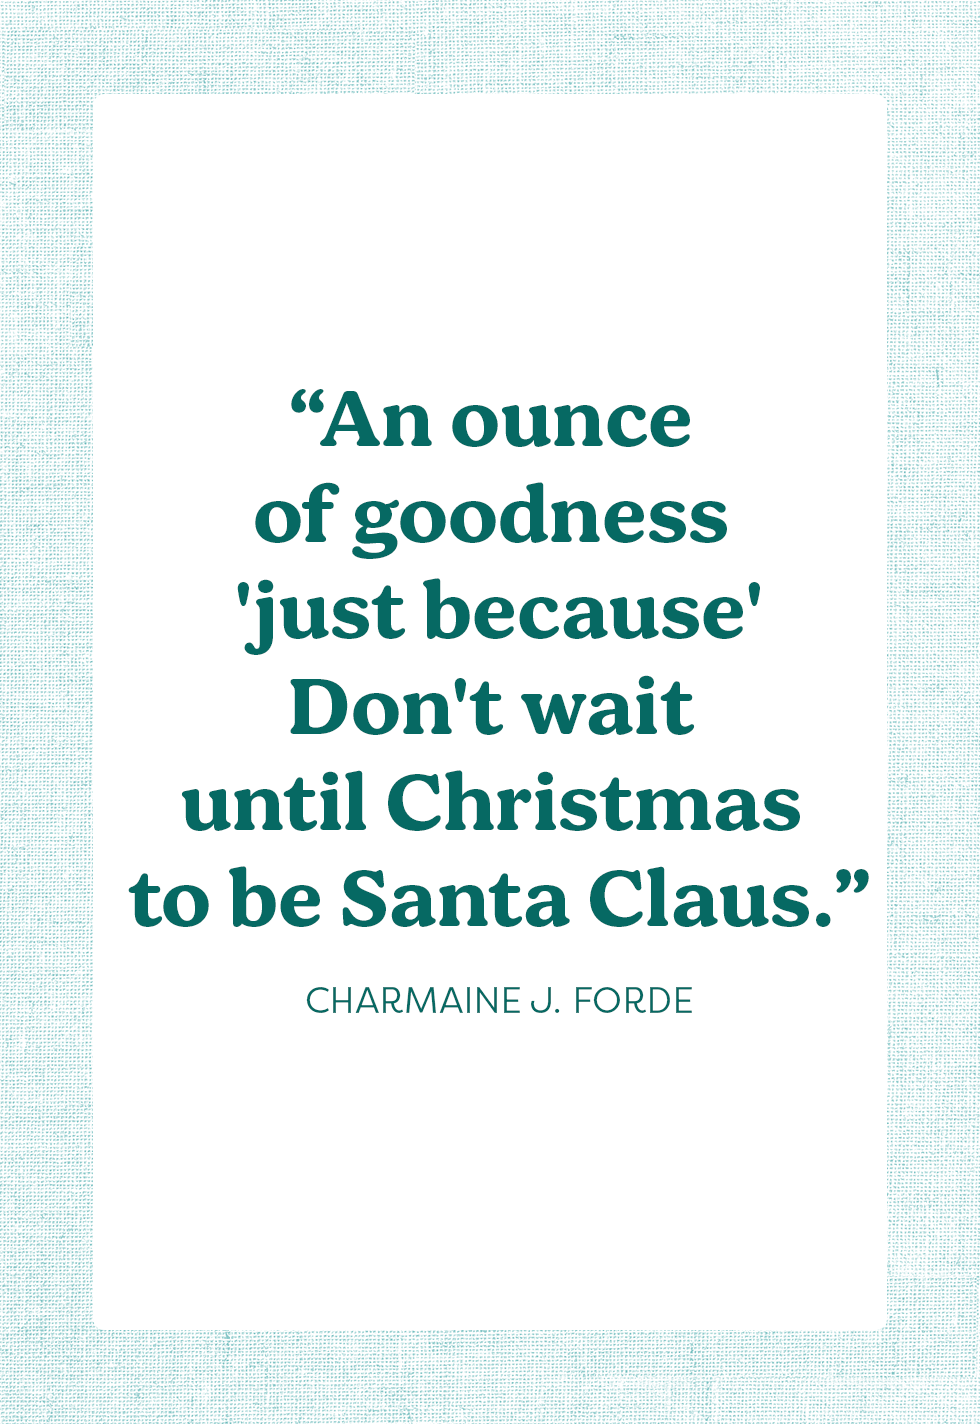 30 Best Santa Quotes That Embrace the Holiday Magic